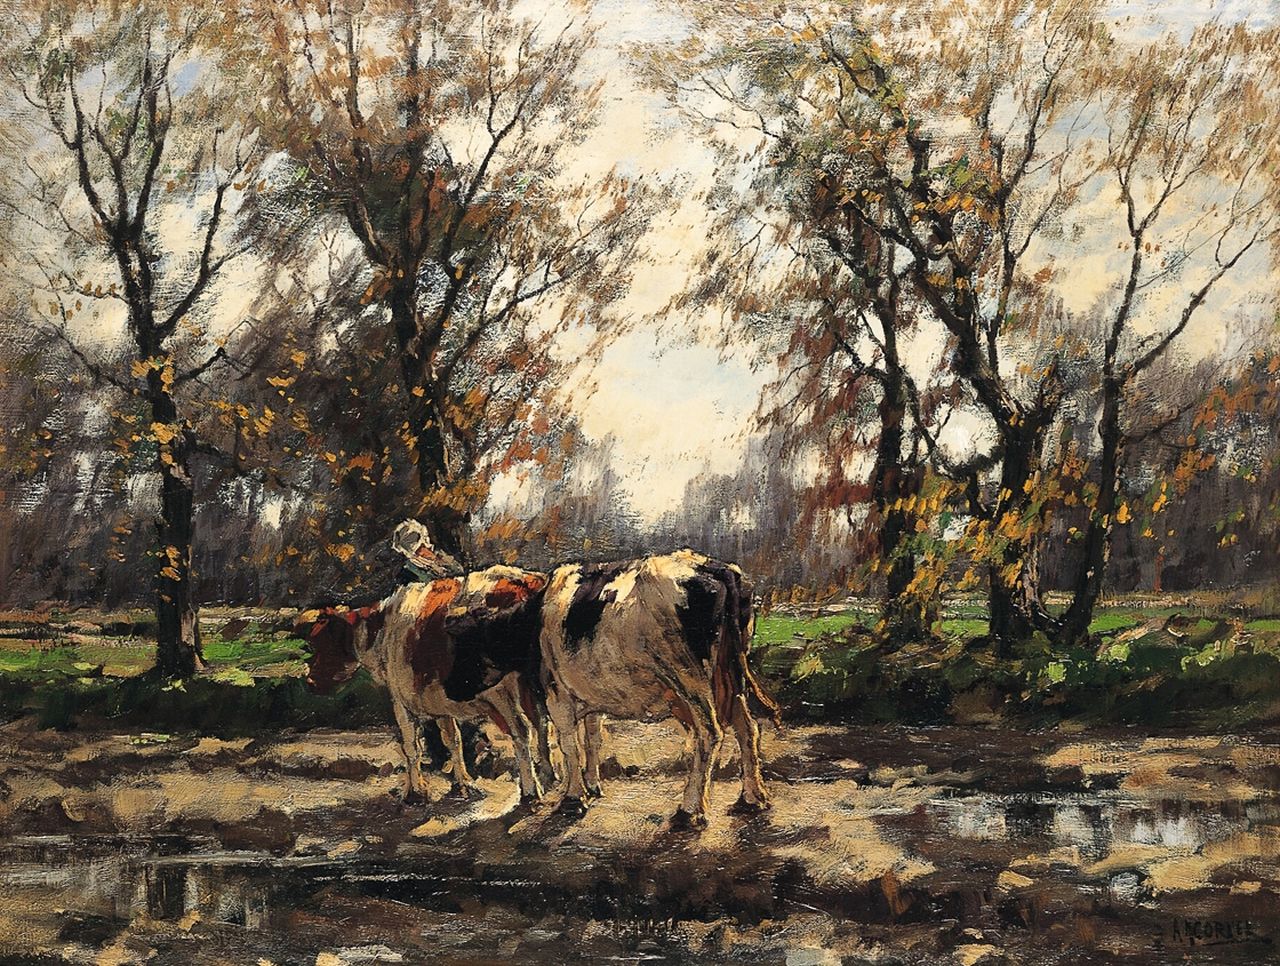 Gorter A.M.  | 'Arnold' Marc Gorter, A milkmaid with her cows after an autumn shower, Öl auf Leinwand 75,0 x 100,5 cm, signed l.r.